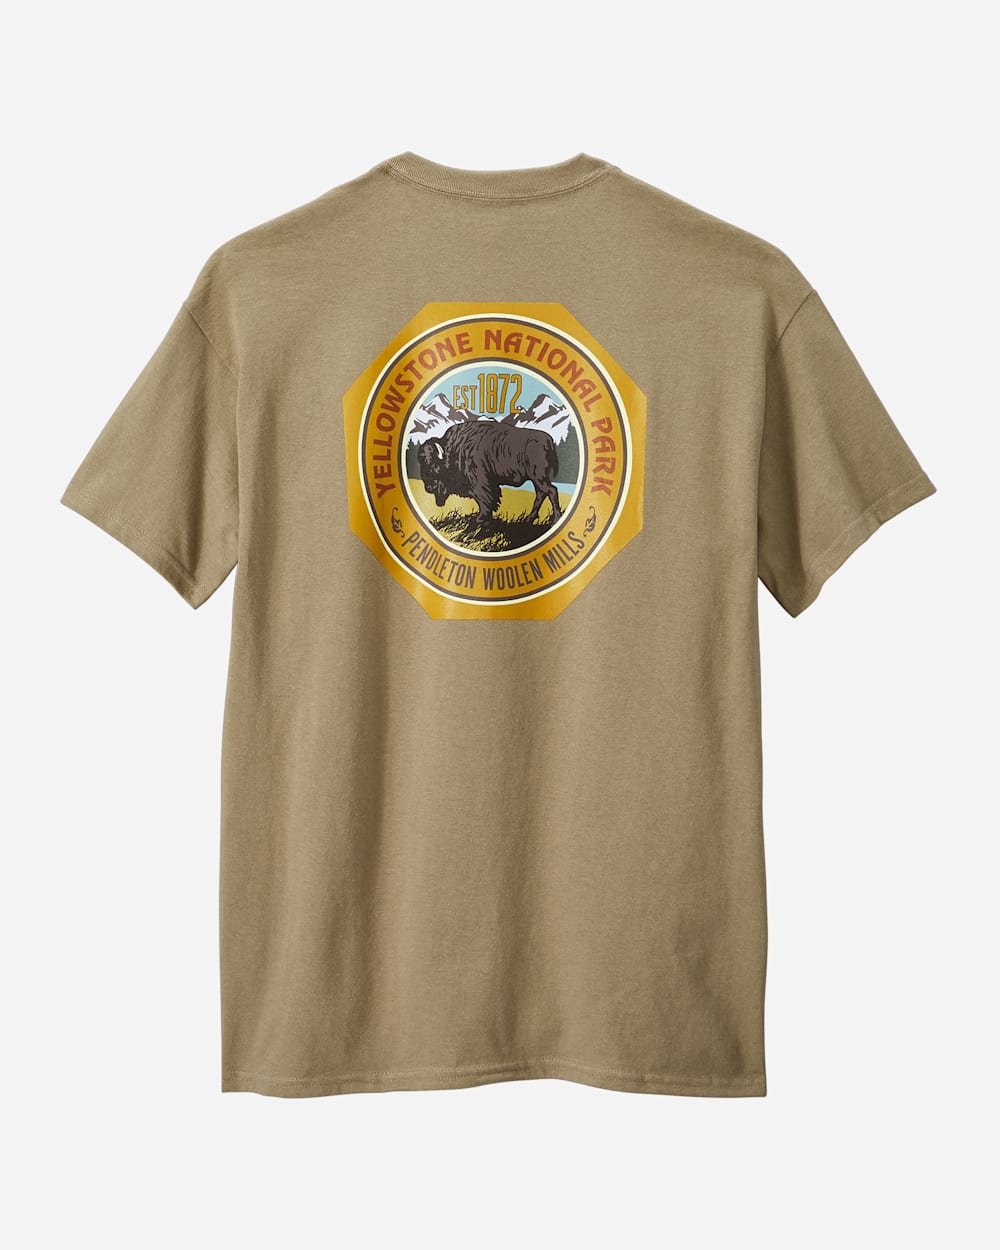 ALTERNATE VIEW OF MEN'S YELLOWSTONE PARK TEE IN OLIVE image number 1